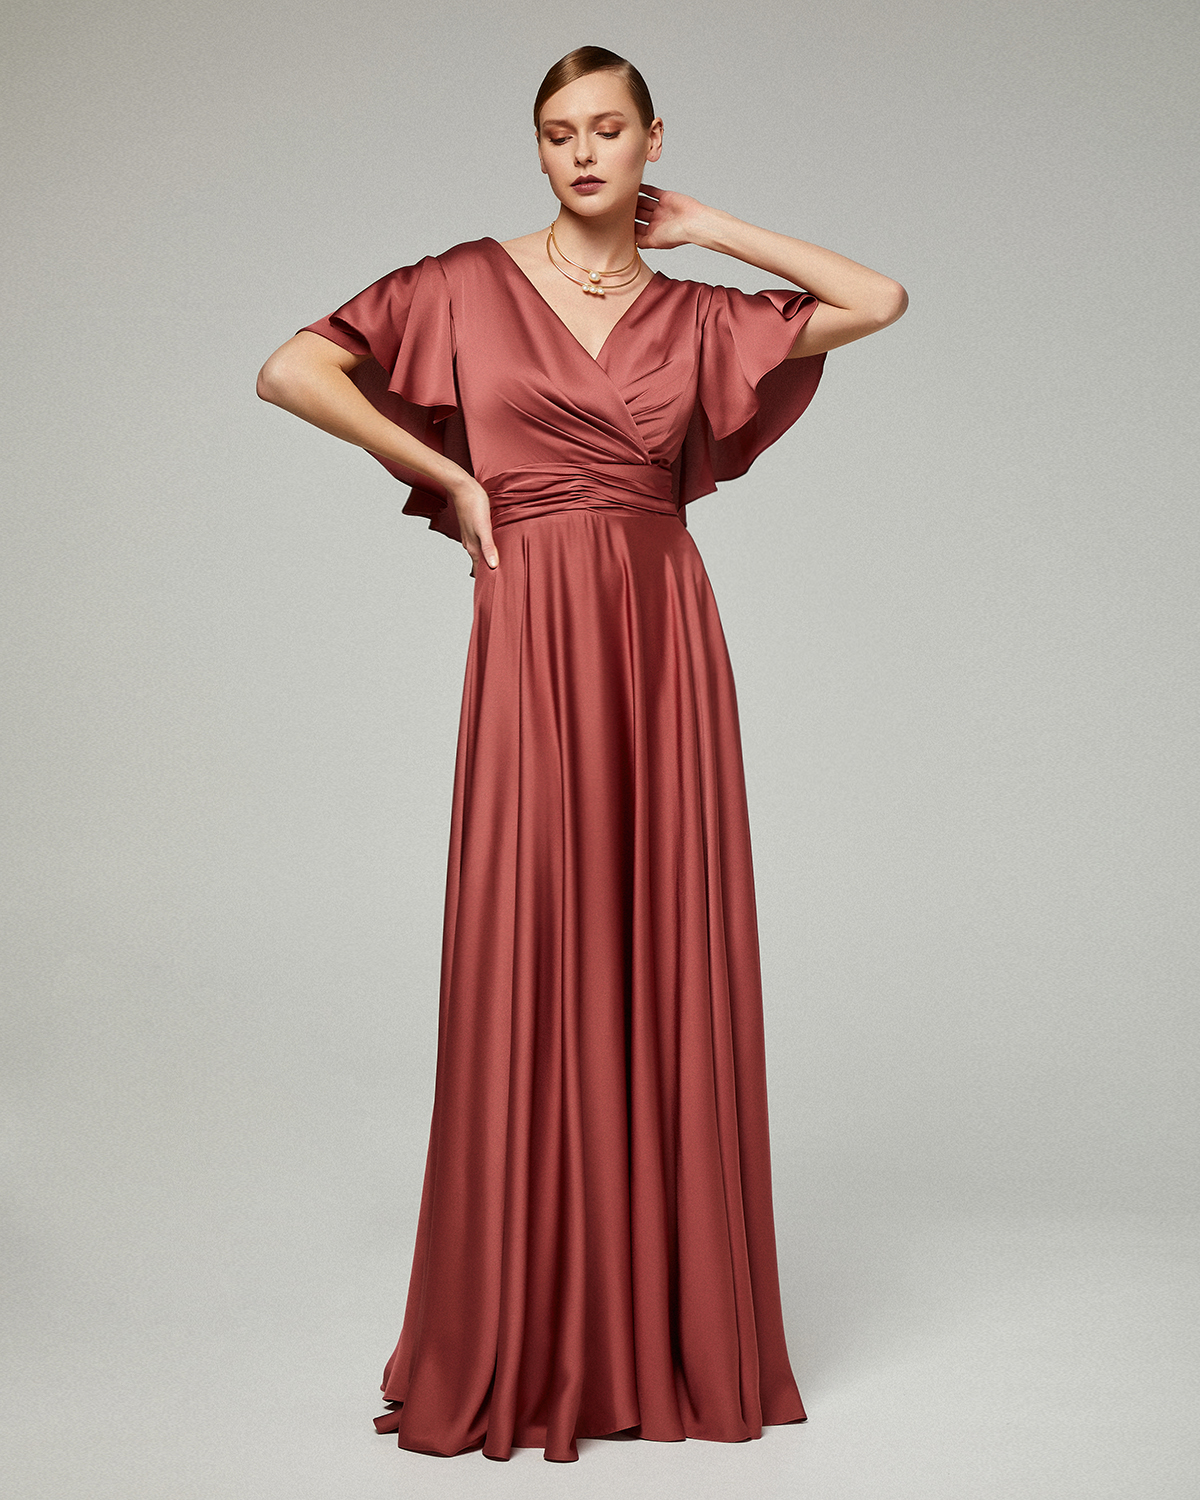 Classic Dresses / Long evening satin dress with short sleeves